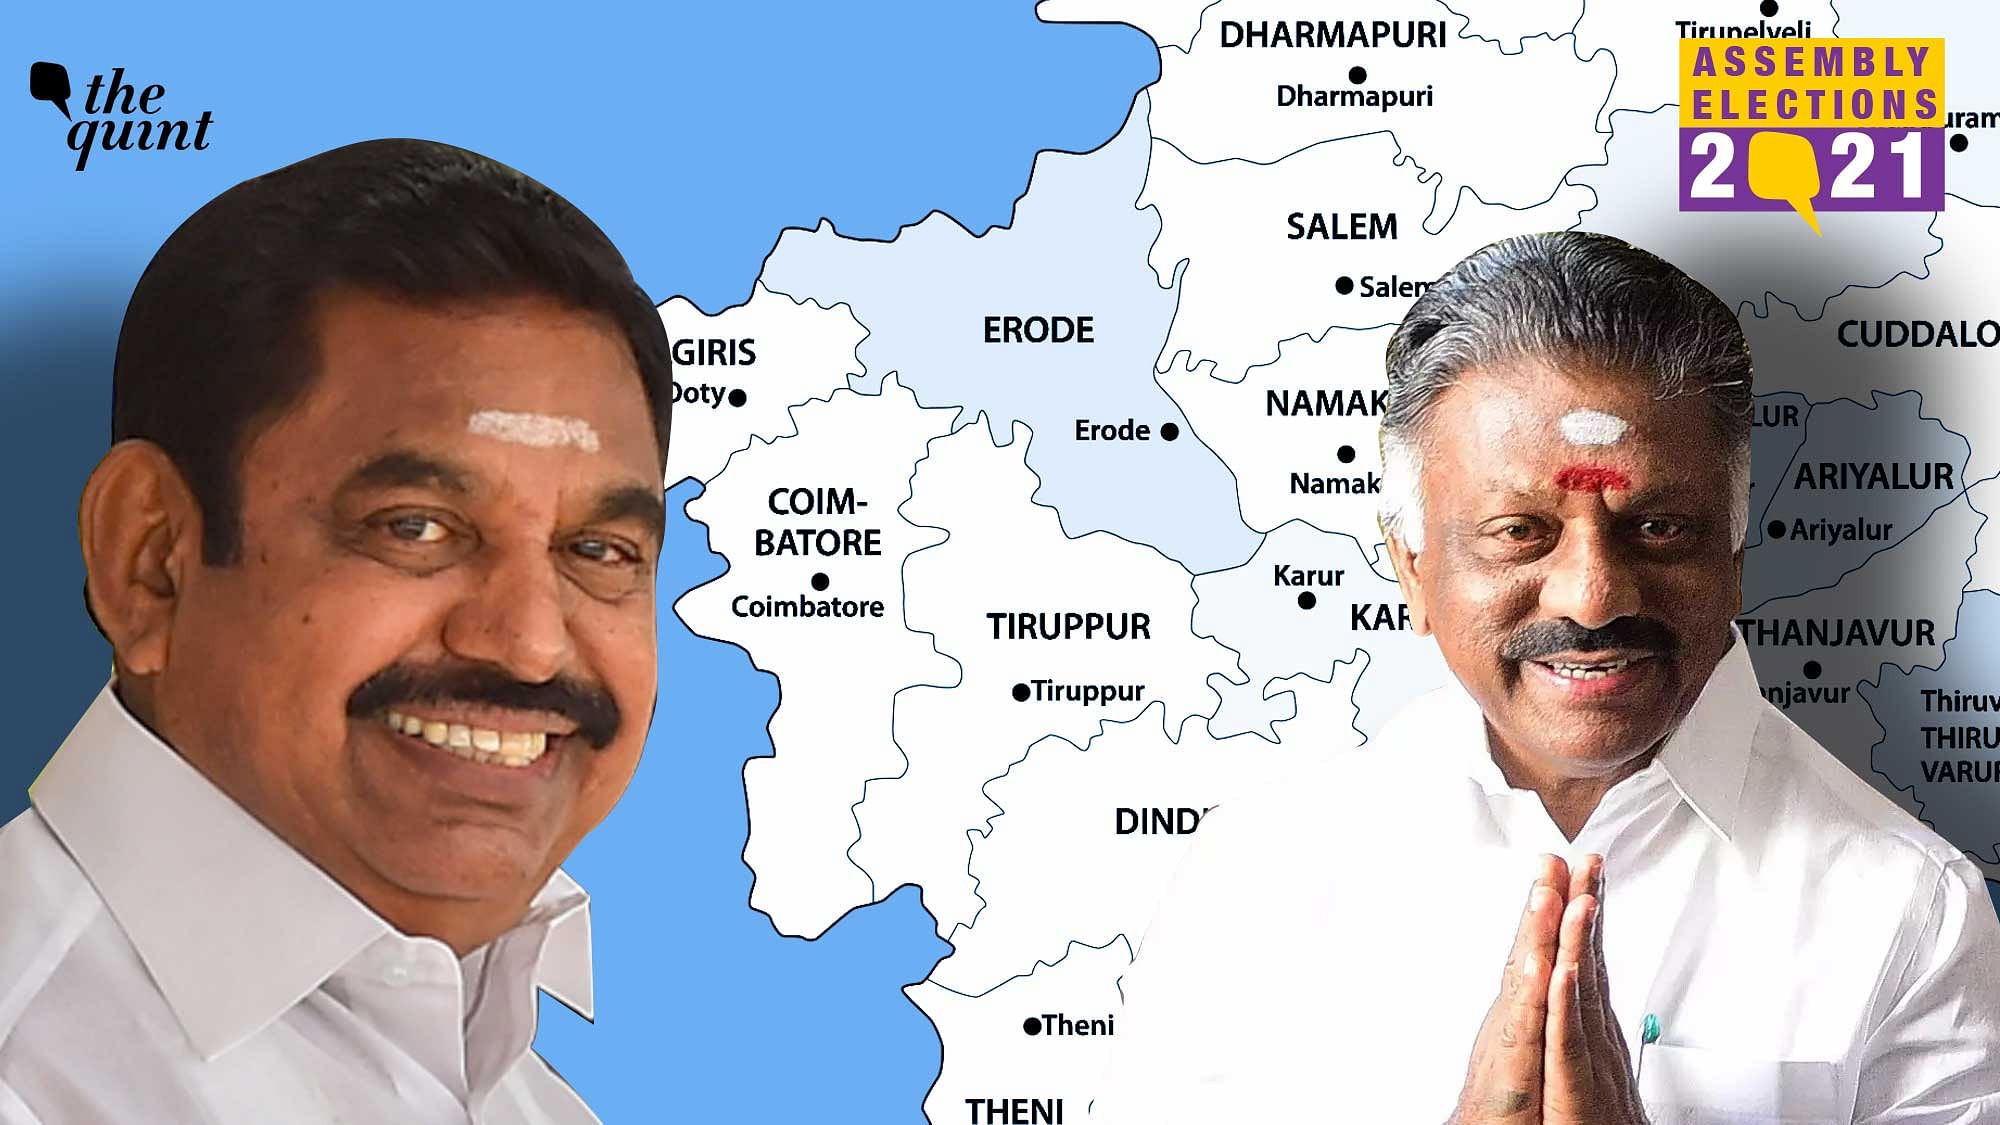 <div class="paragraphs"><p>Between Edappadi Palaniswamy and O Panneerselvam a leadership tussle still brews within the AIADMK.</p></div>